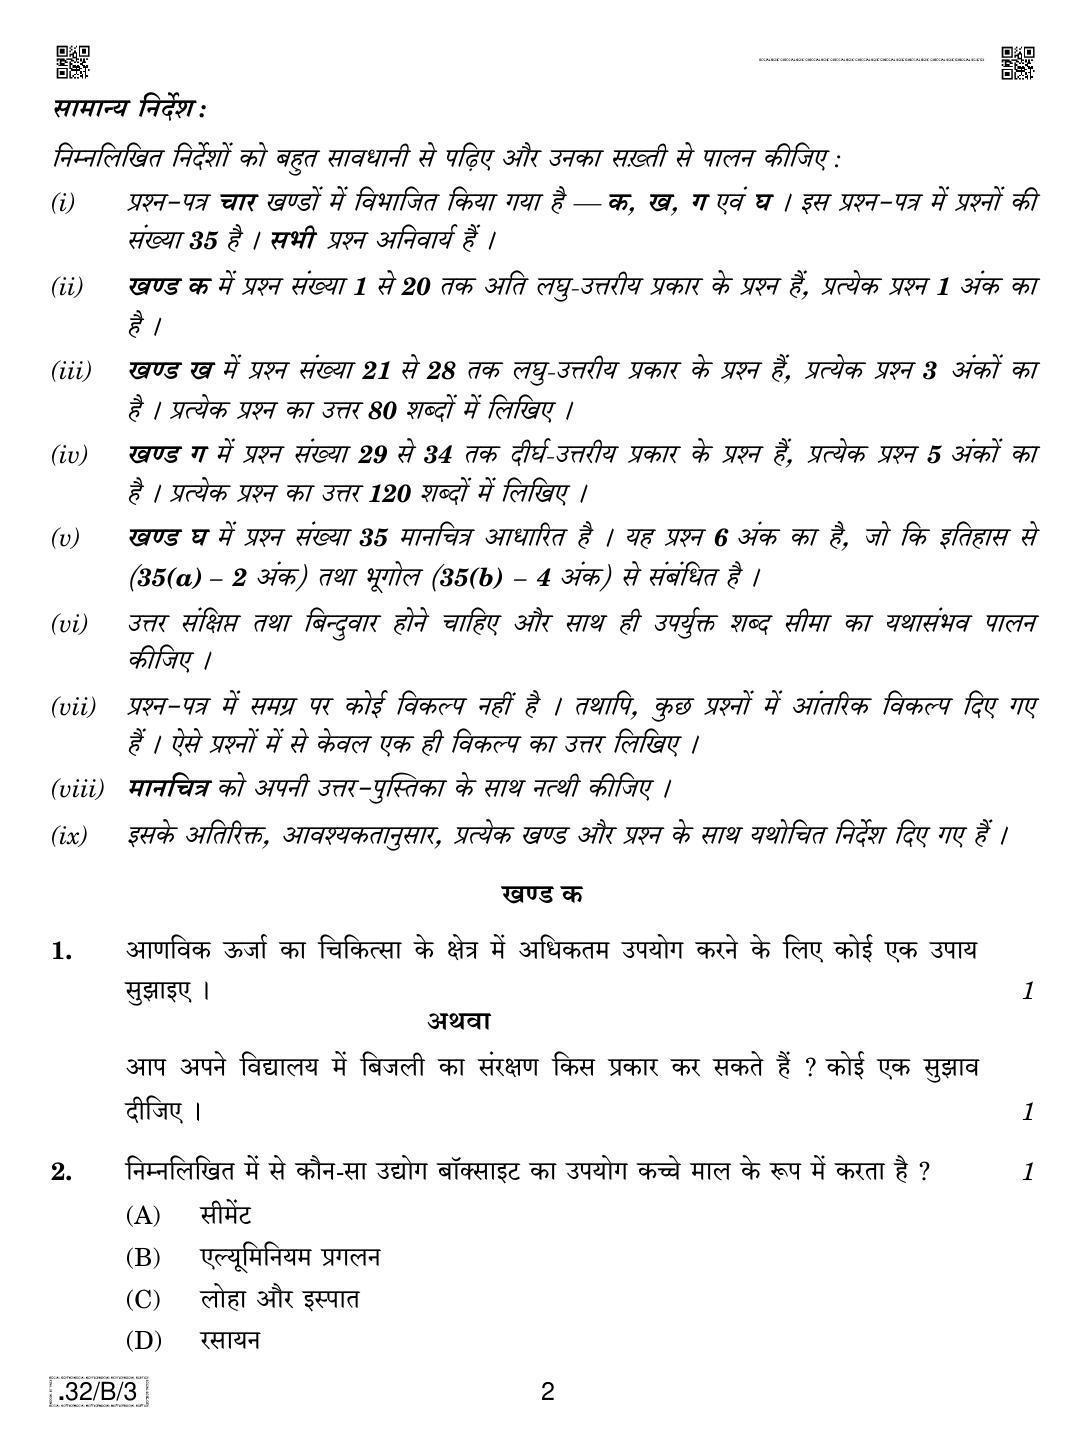 CBSE Class 10 32-C-3 Social Science 2020 Compartment Question Paper - Page 2